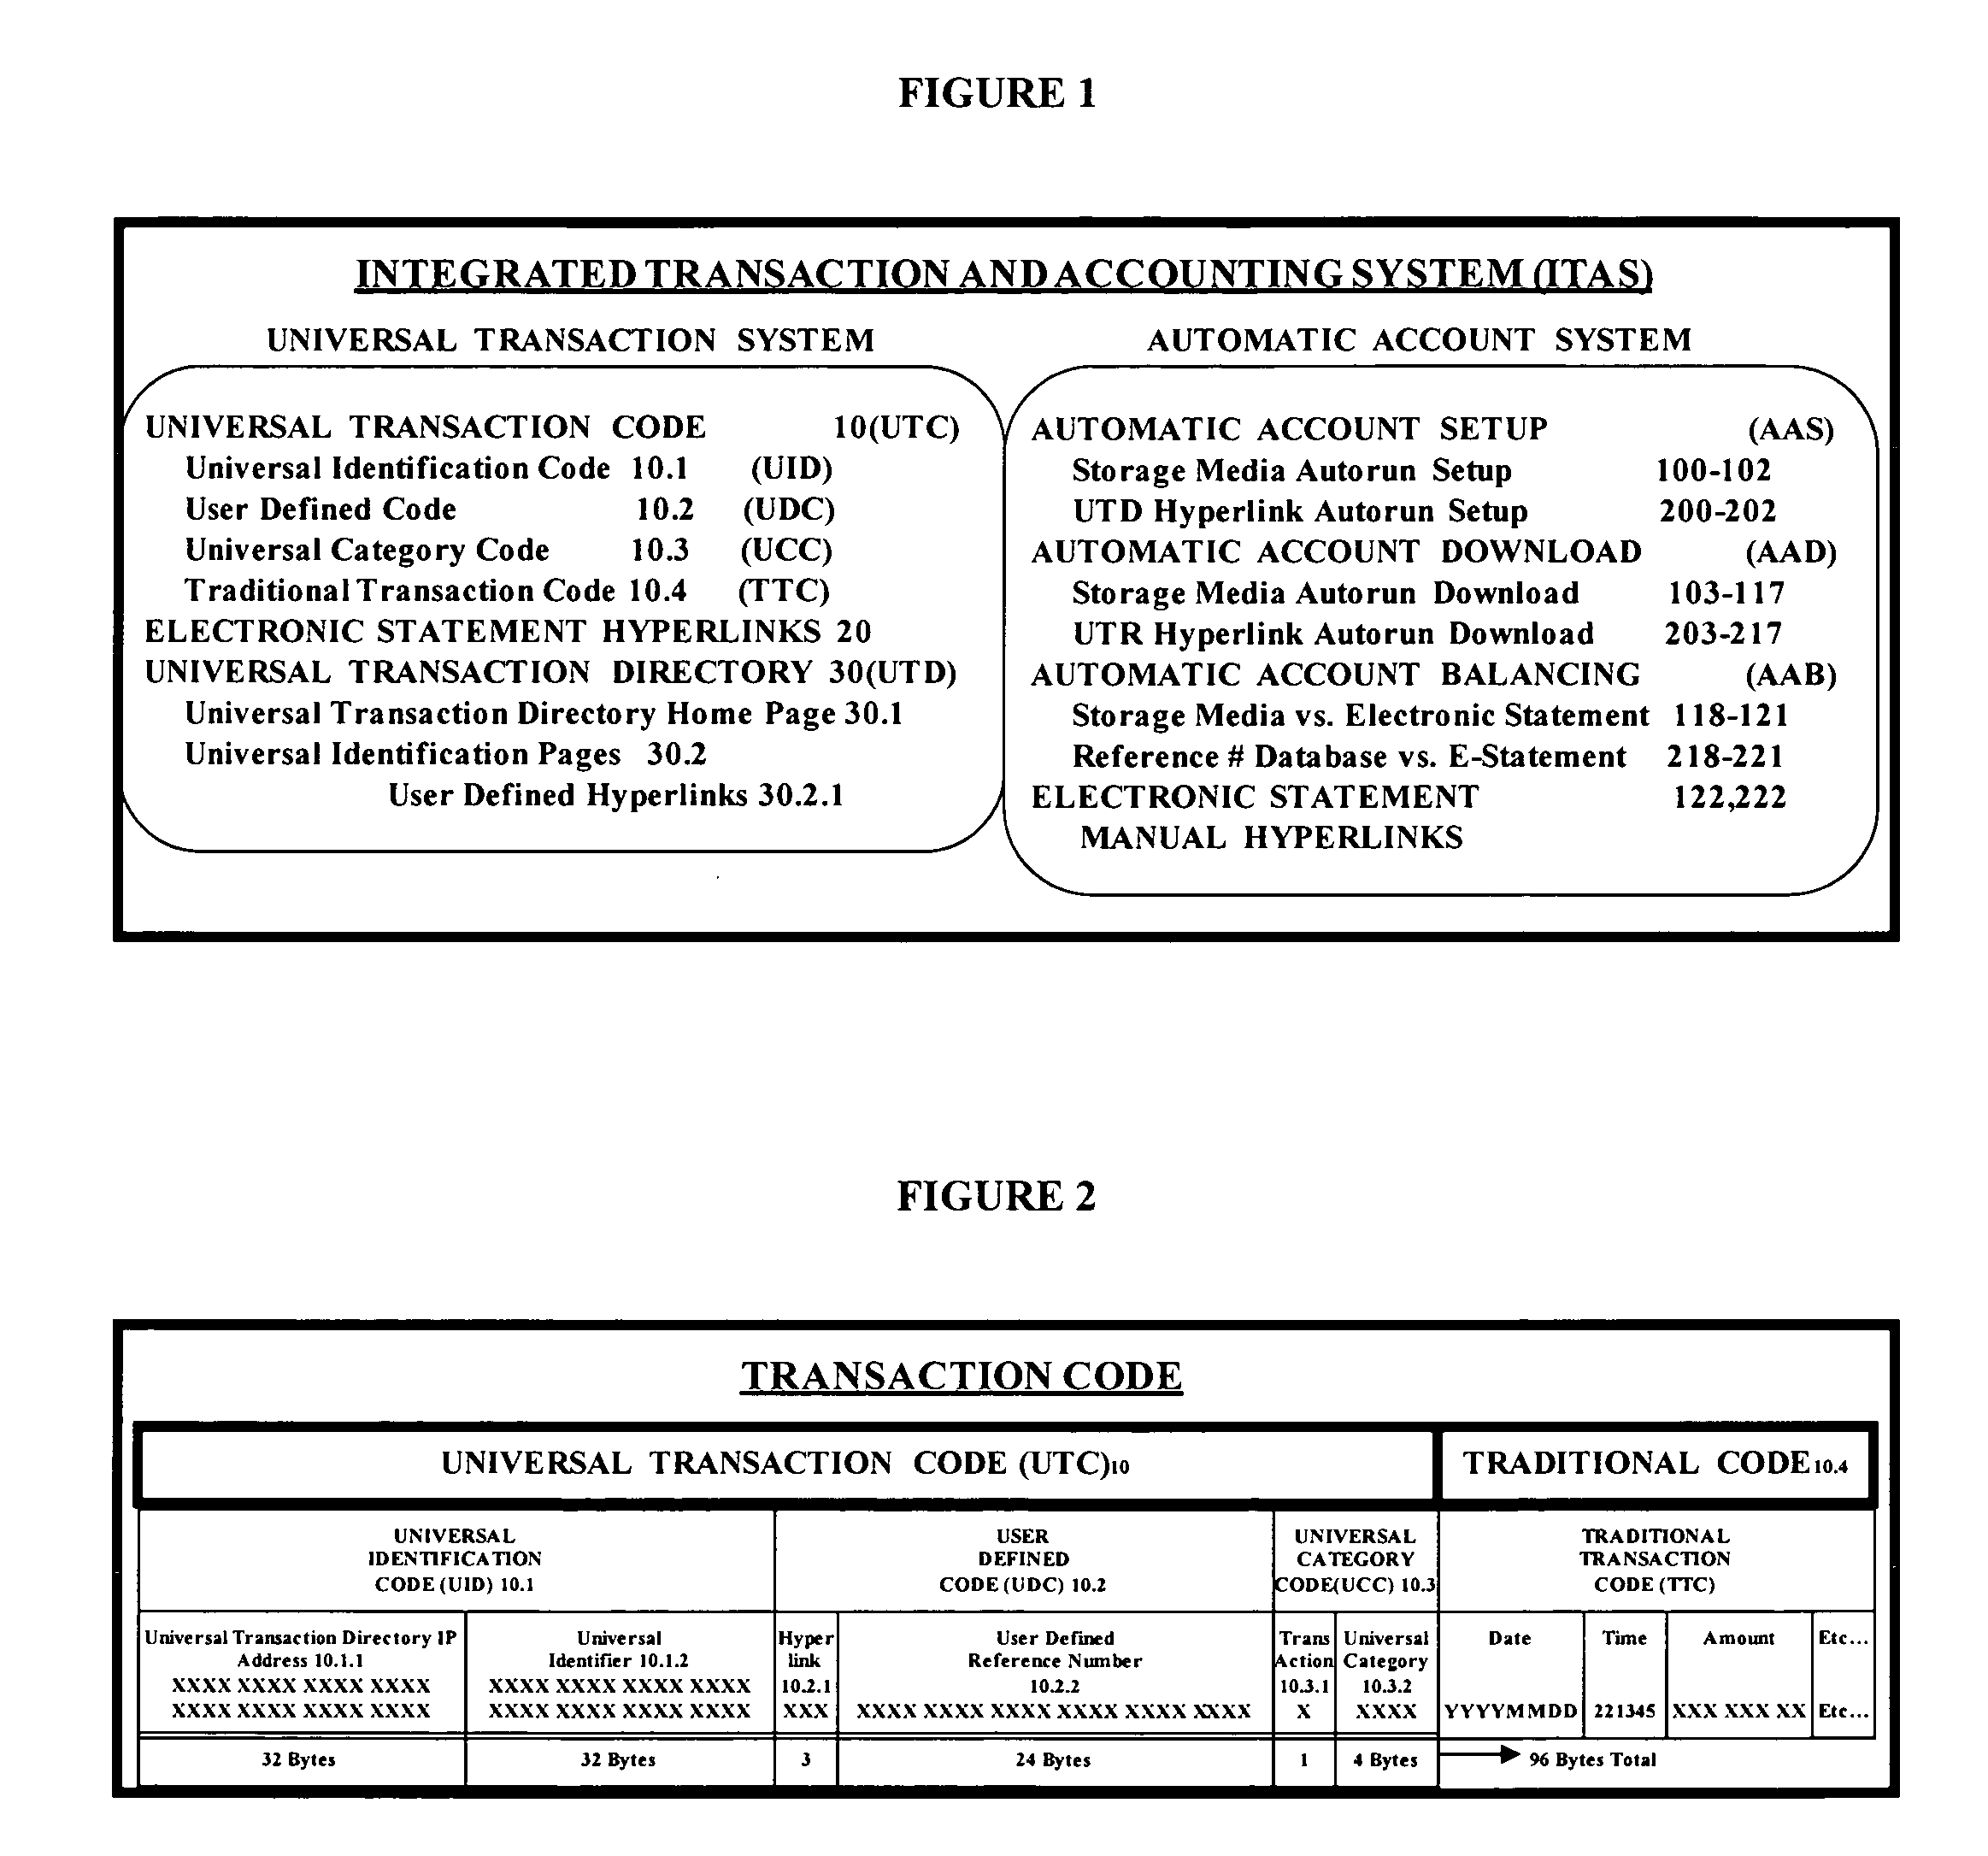 Universal transaction code (UTD) used to standardize the method of capturing, storing, and retrieving transaction data